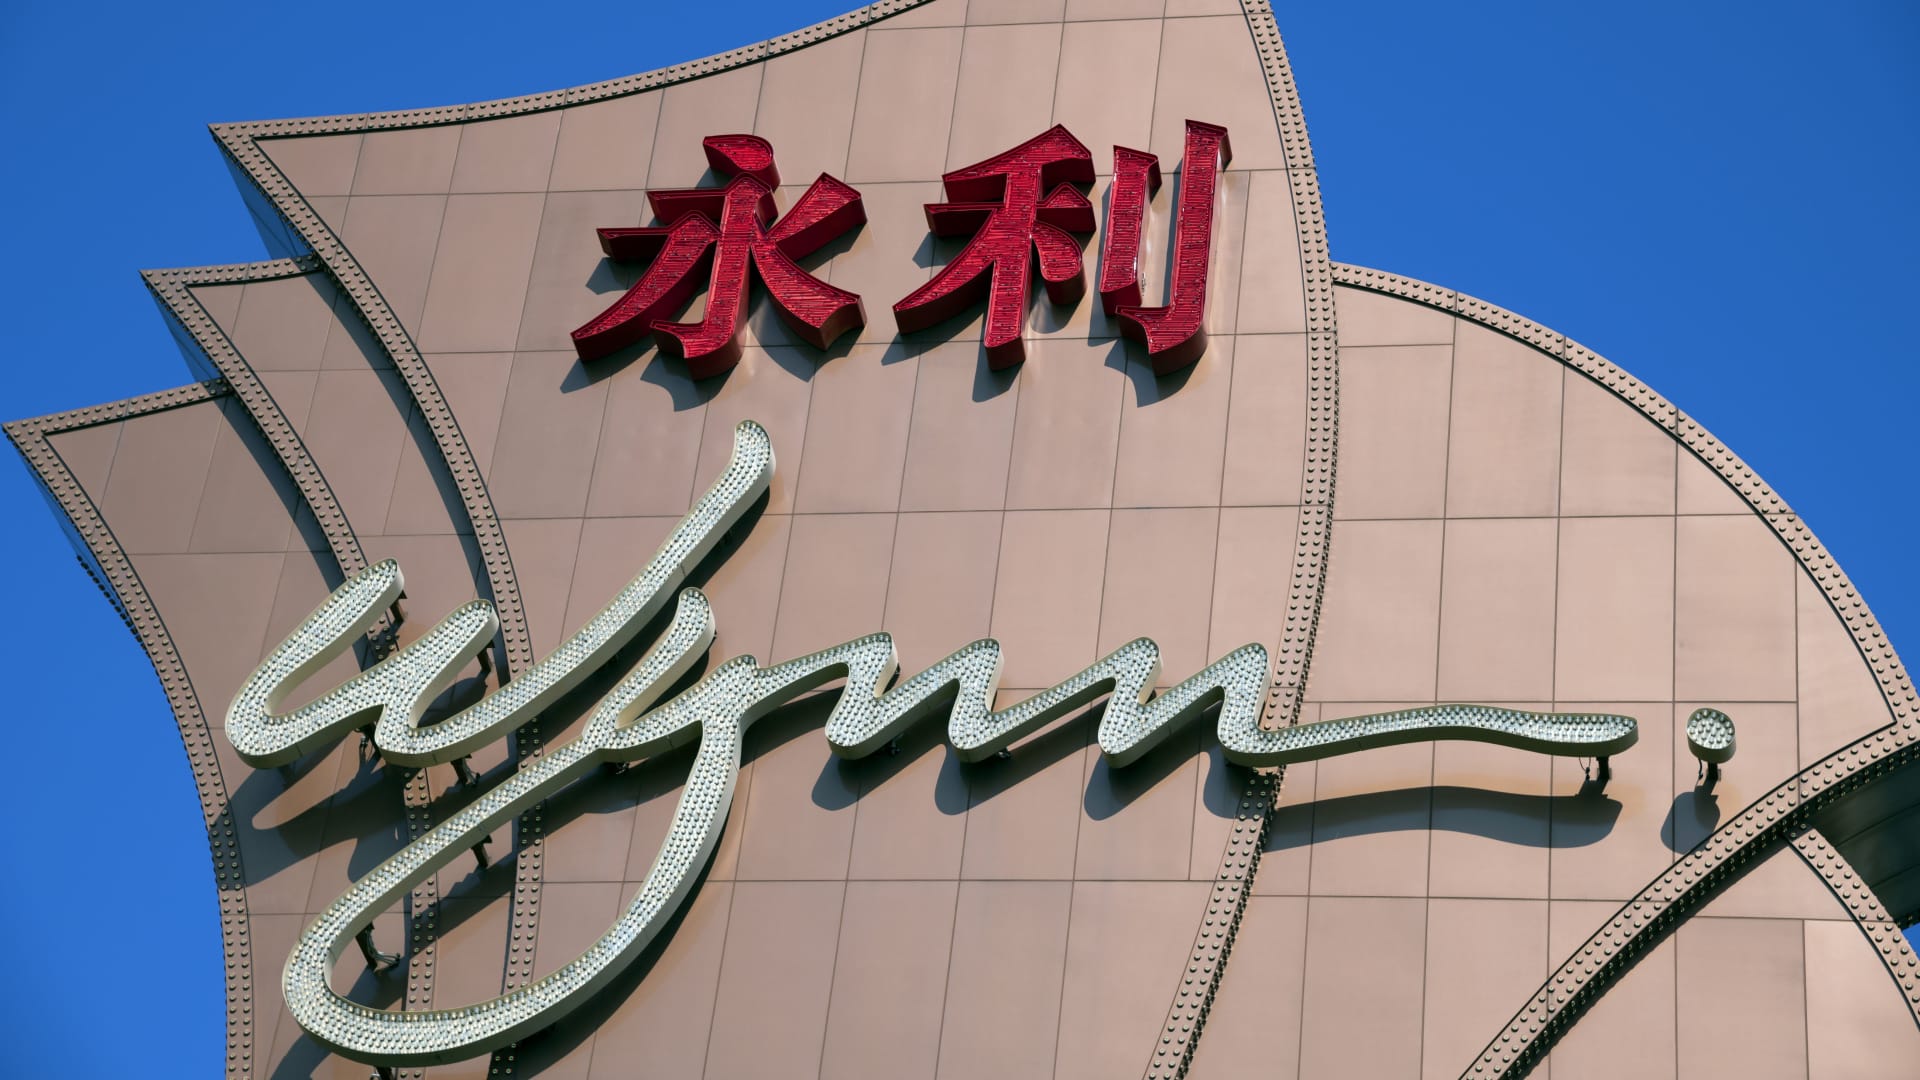 Jim Cramer says patience in Wynn Resorts will be rewarded after surprise post-earnings drop - CNBC